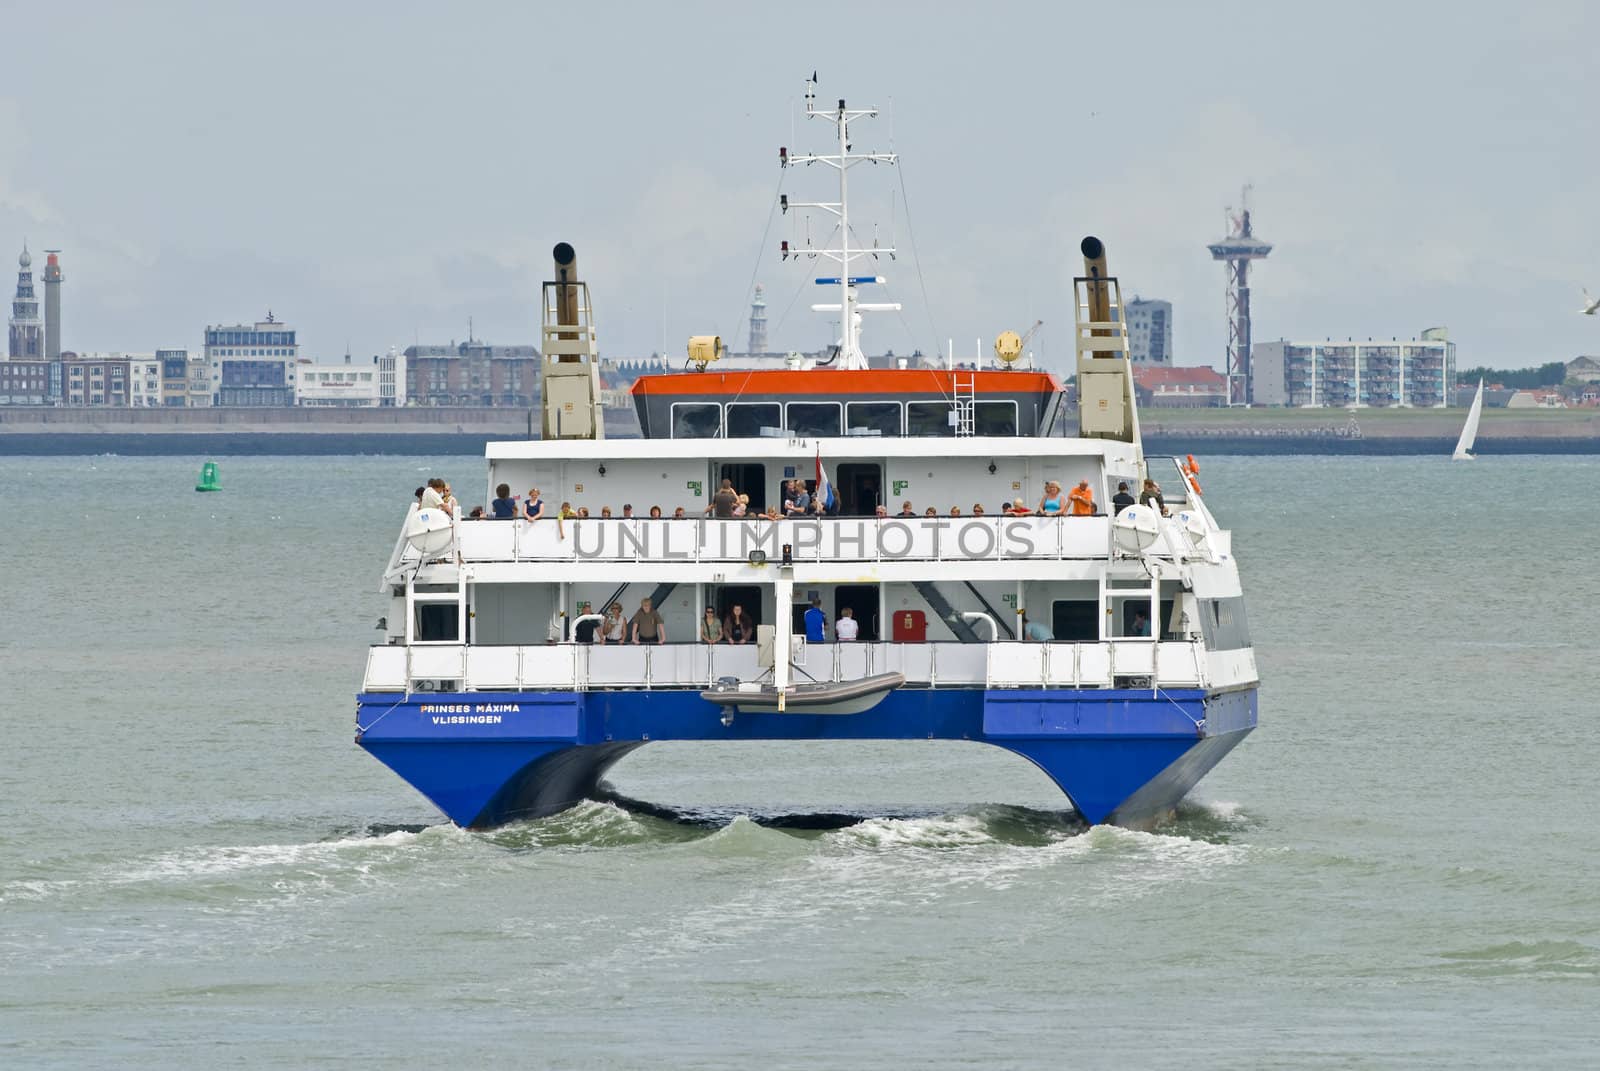 Ferry boat leaving the harbor from Beskens, the Netherlands

